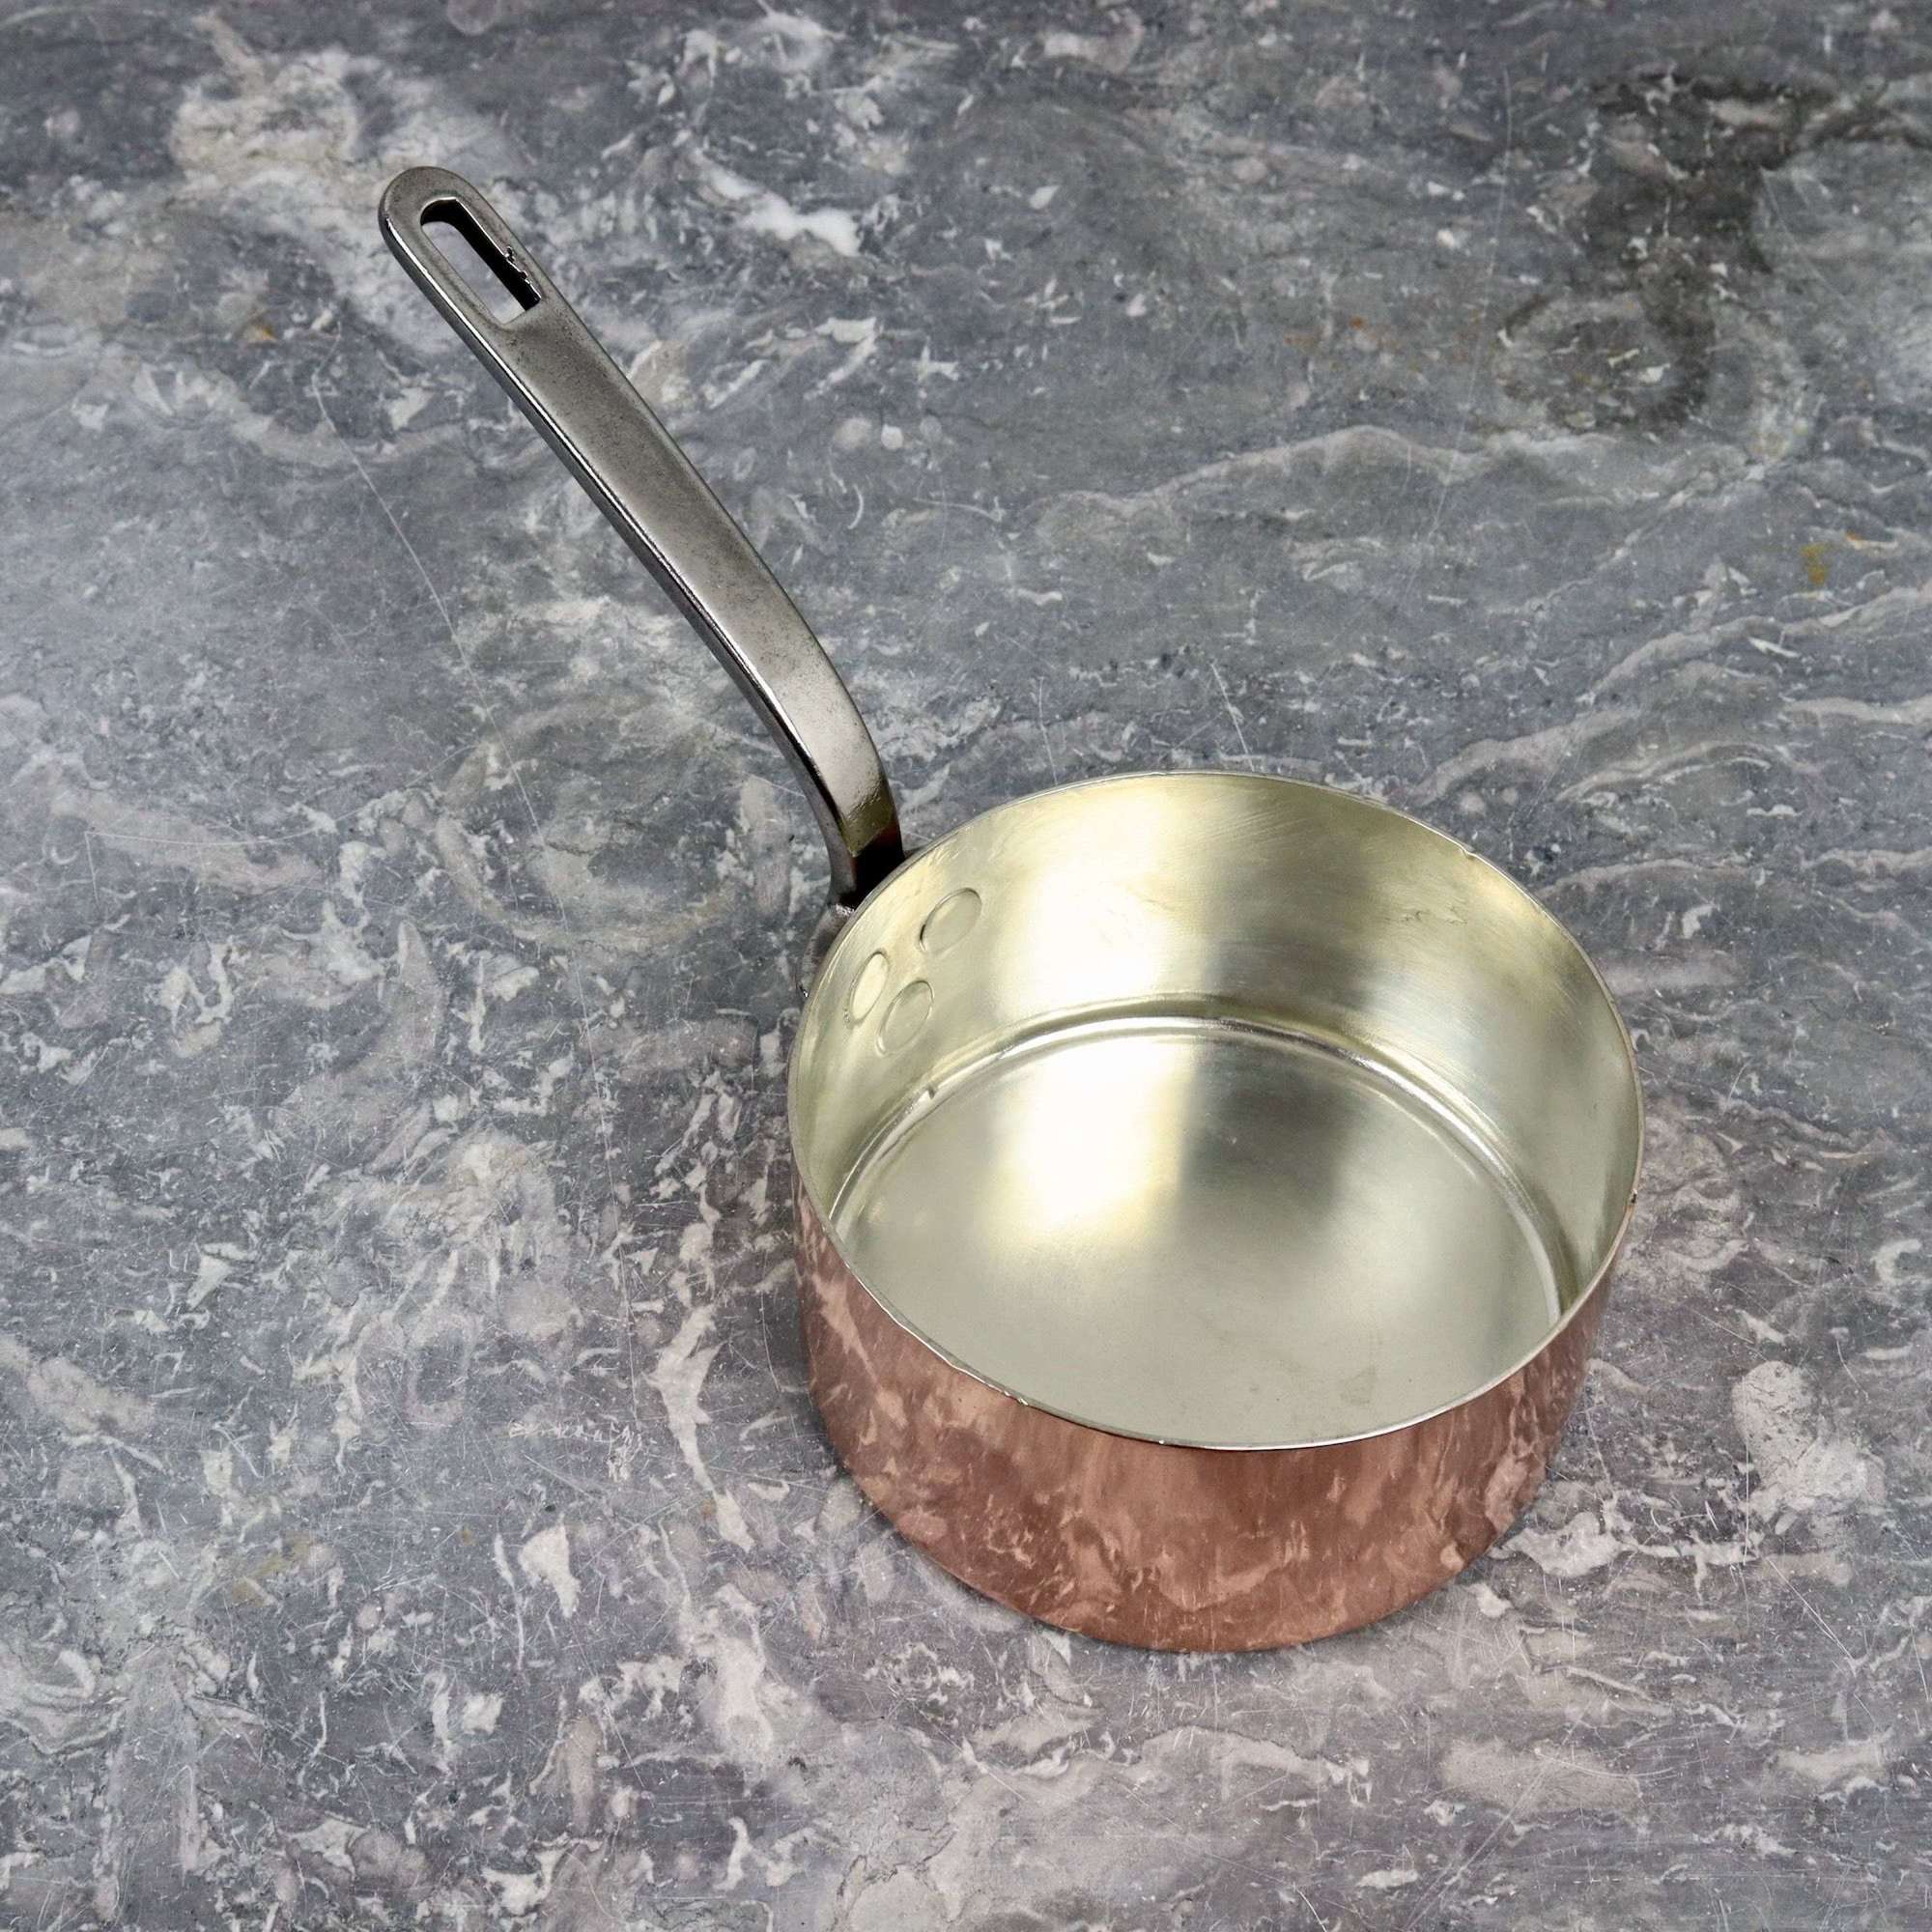 Quality, French copper saucepan